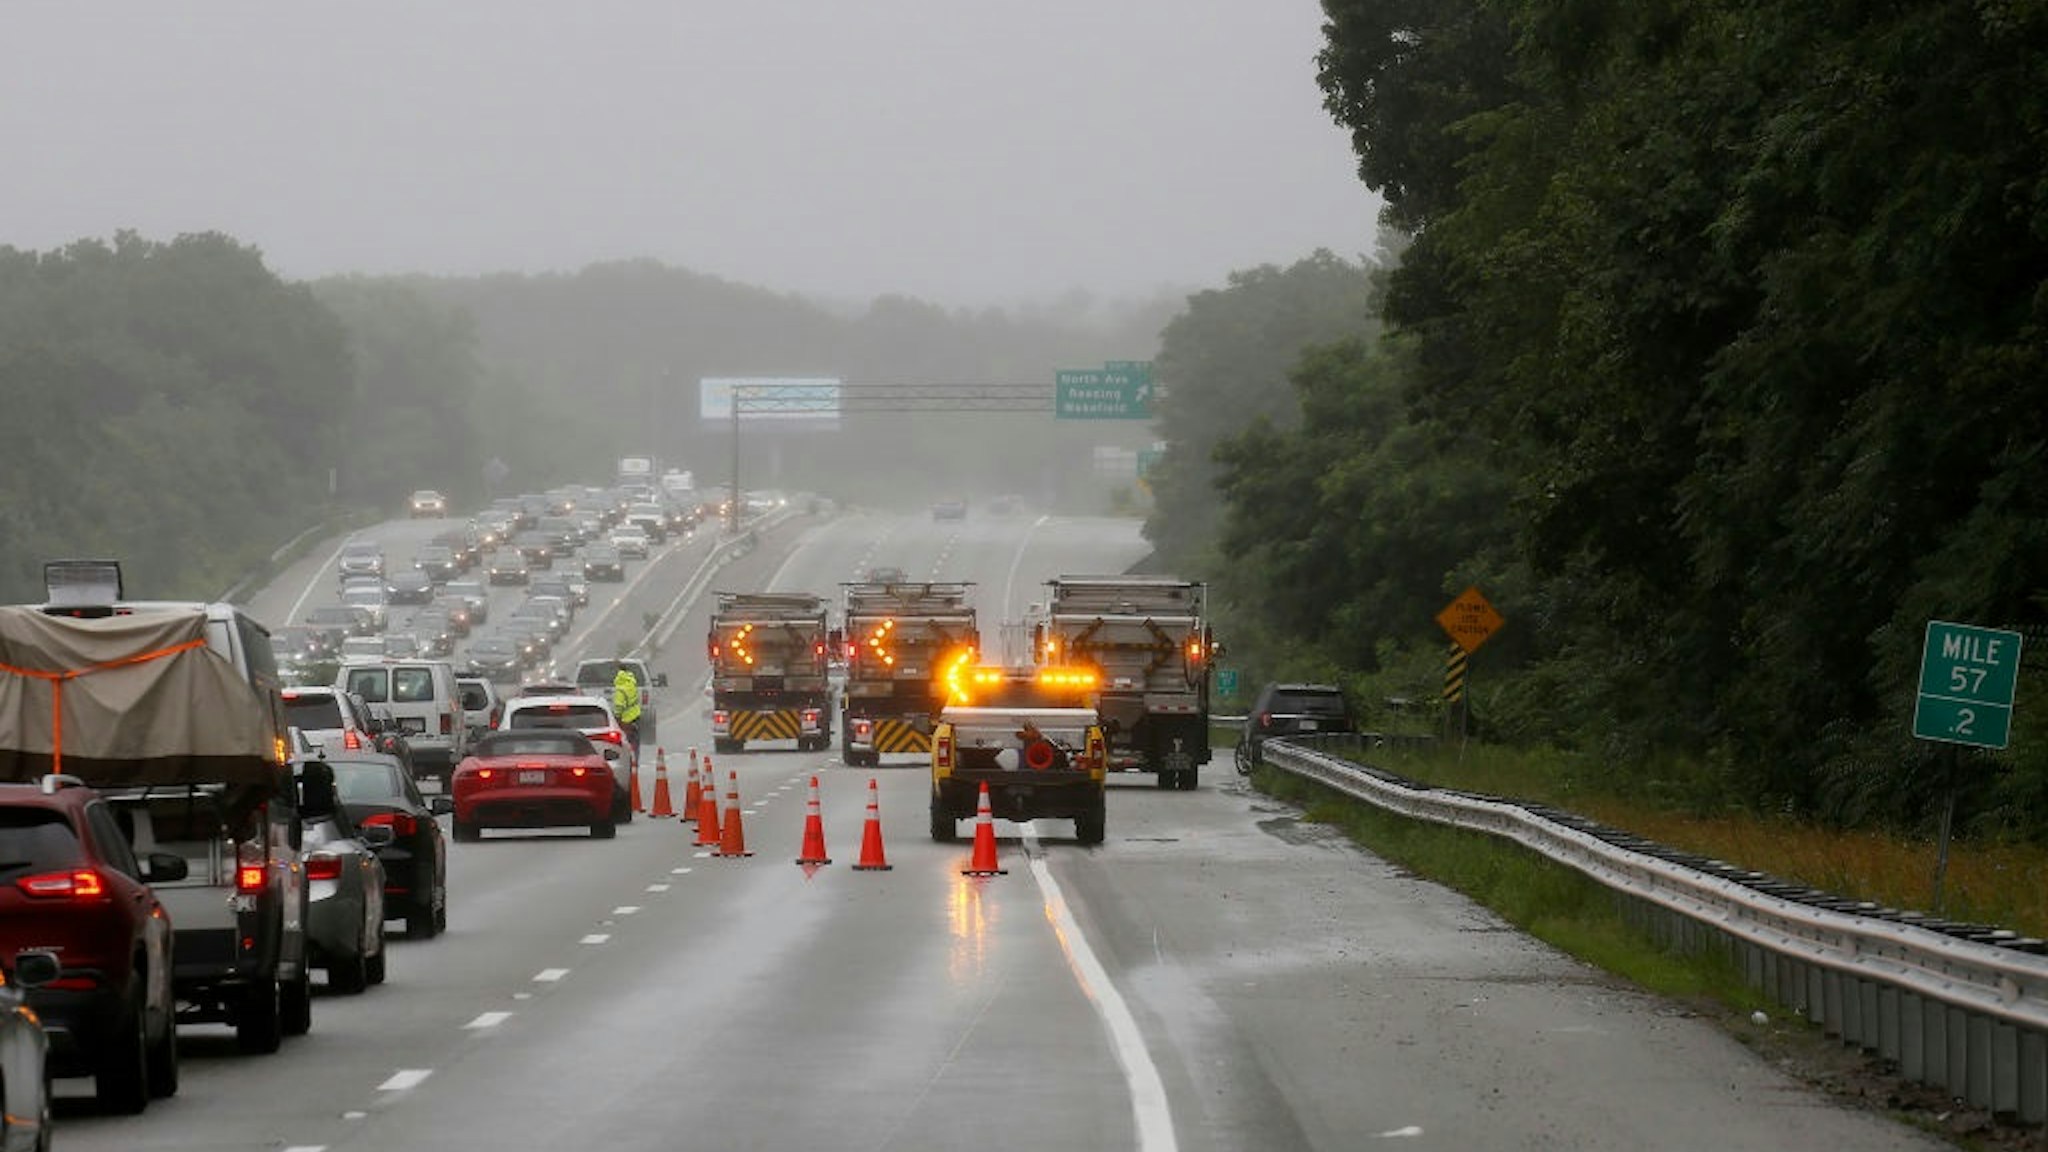 Wakefield, MA. - July 3: Some Lane closures are still in place on I-95 north in Wakefield as the investigation into an armed stand off with police continues along the highway, July 3, 2021 Wakefield, MA.